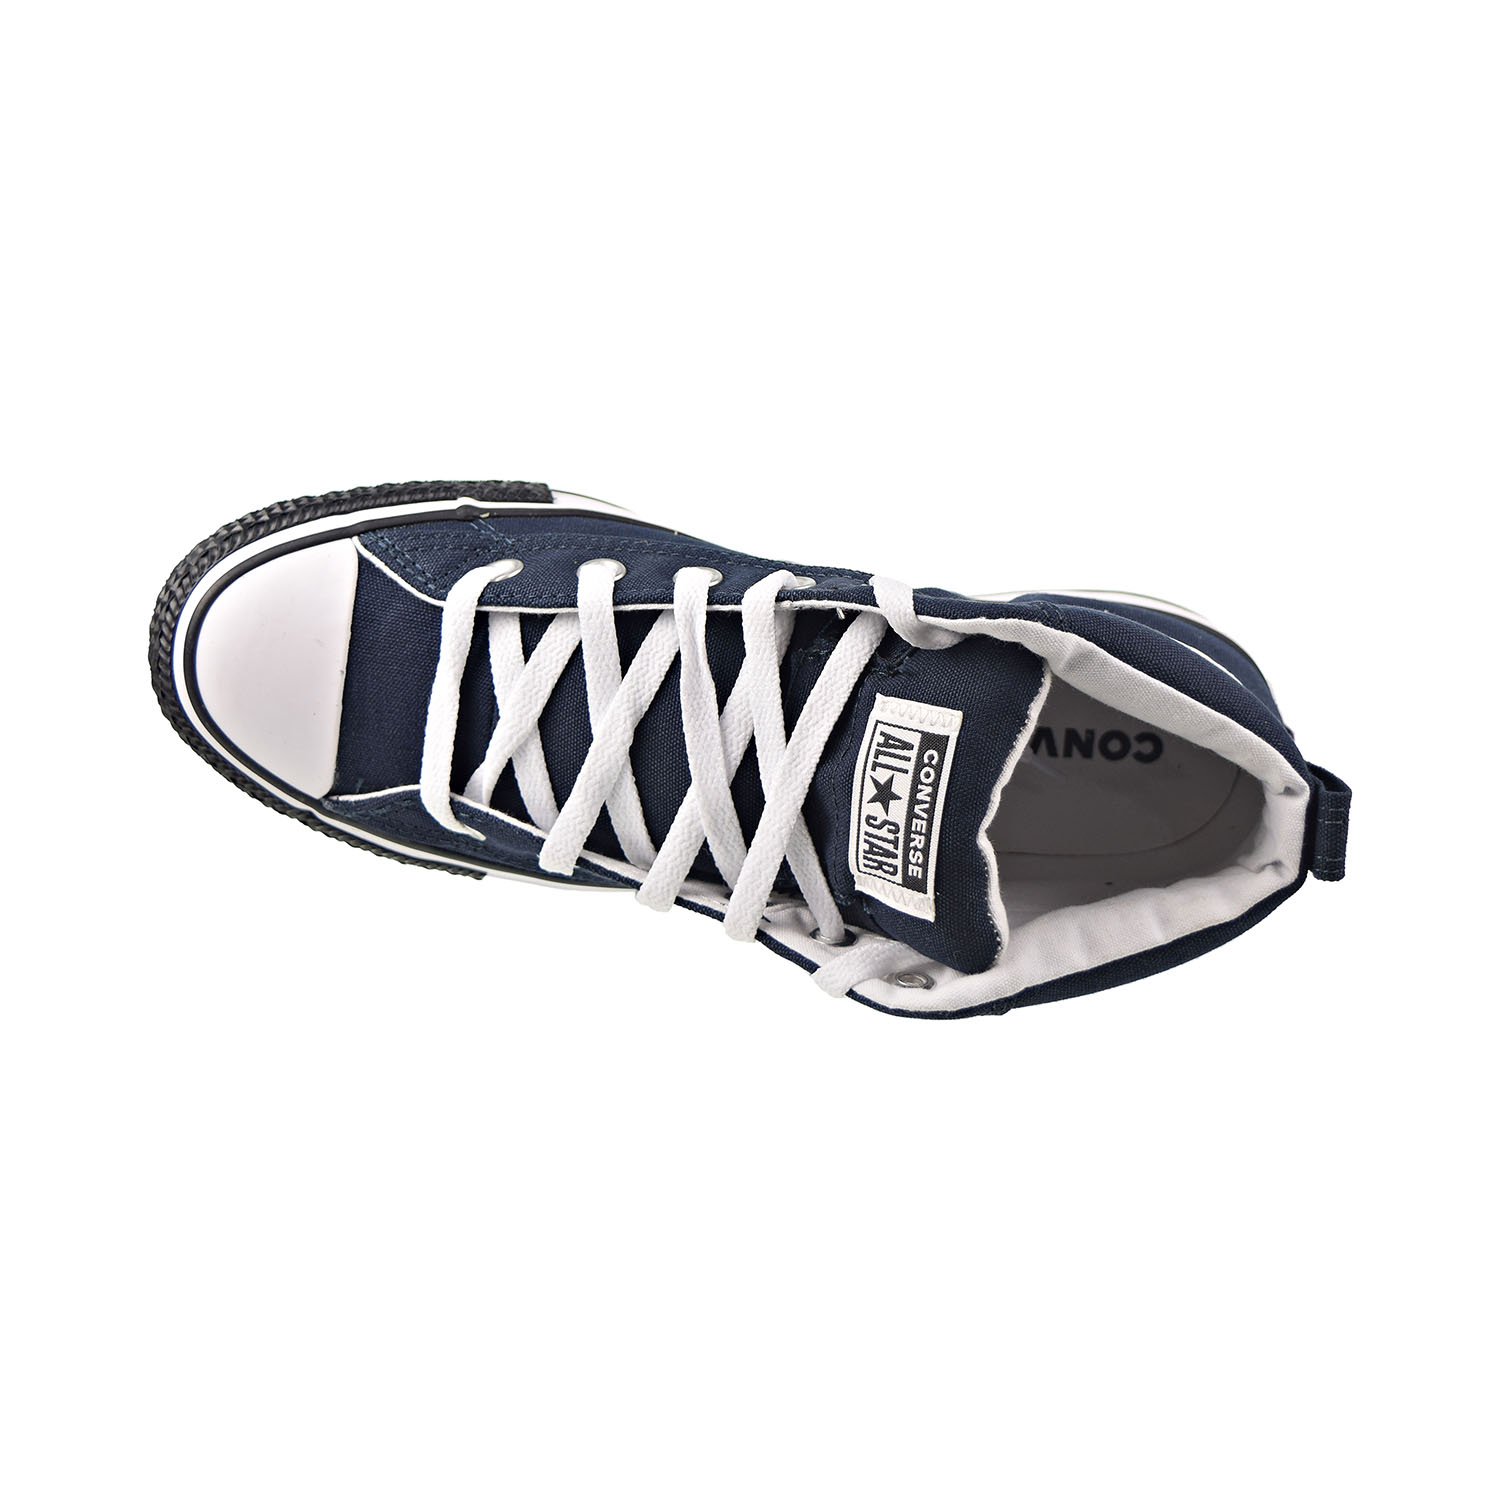 Converse Chuck Taylor All Star Street Mid Men's Shoes Dark Obsidian-White-Black 166337f - image 5 of 6